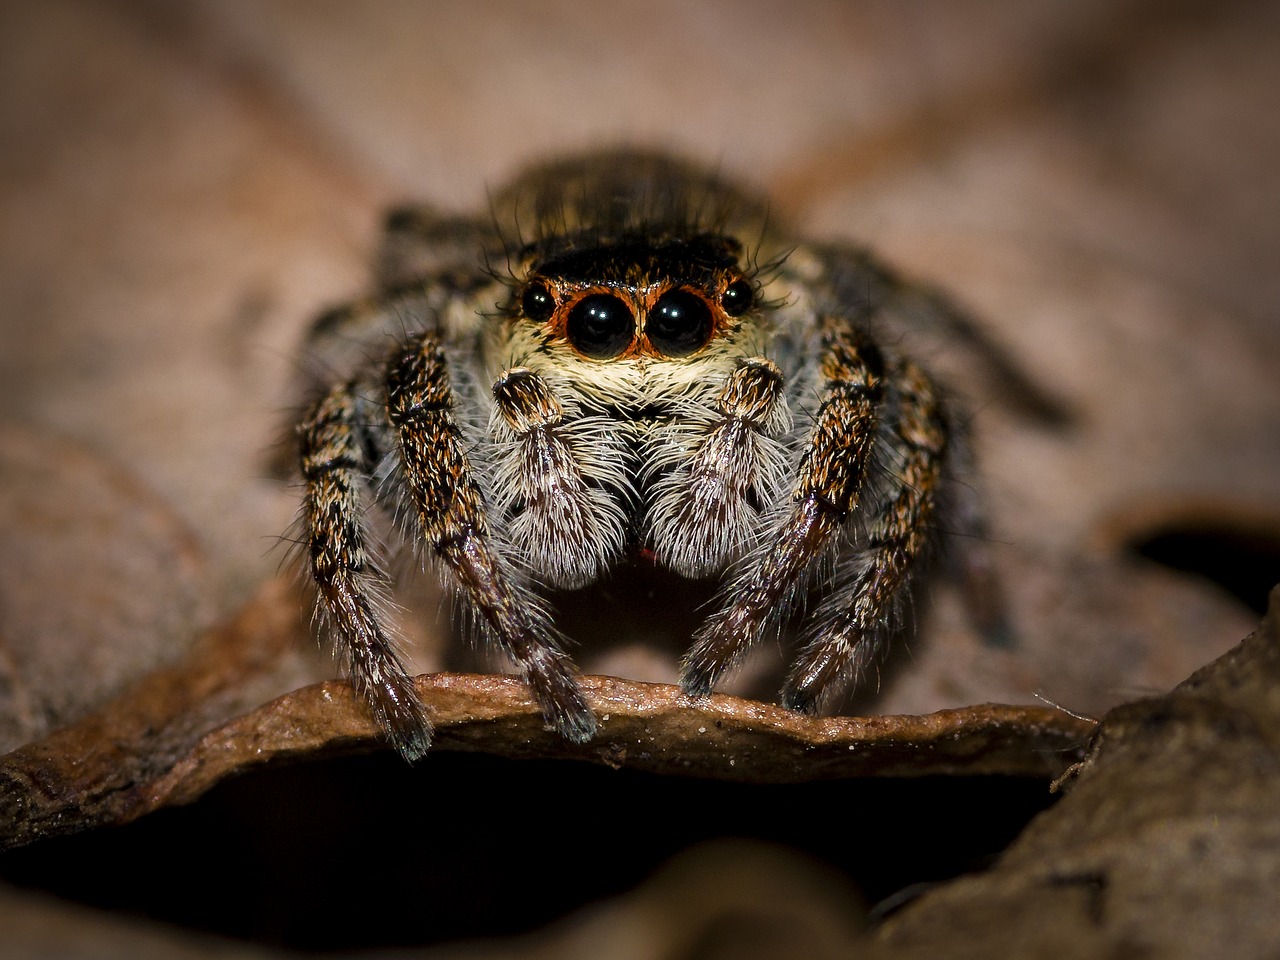 10 Things You Didn’t Know About Spiders